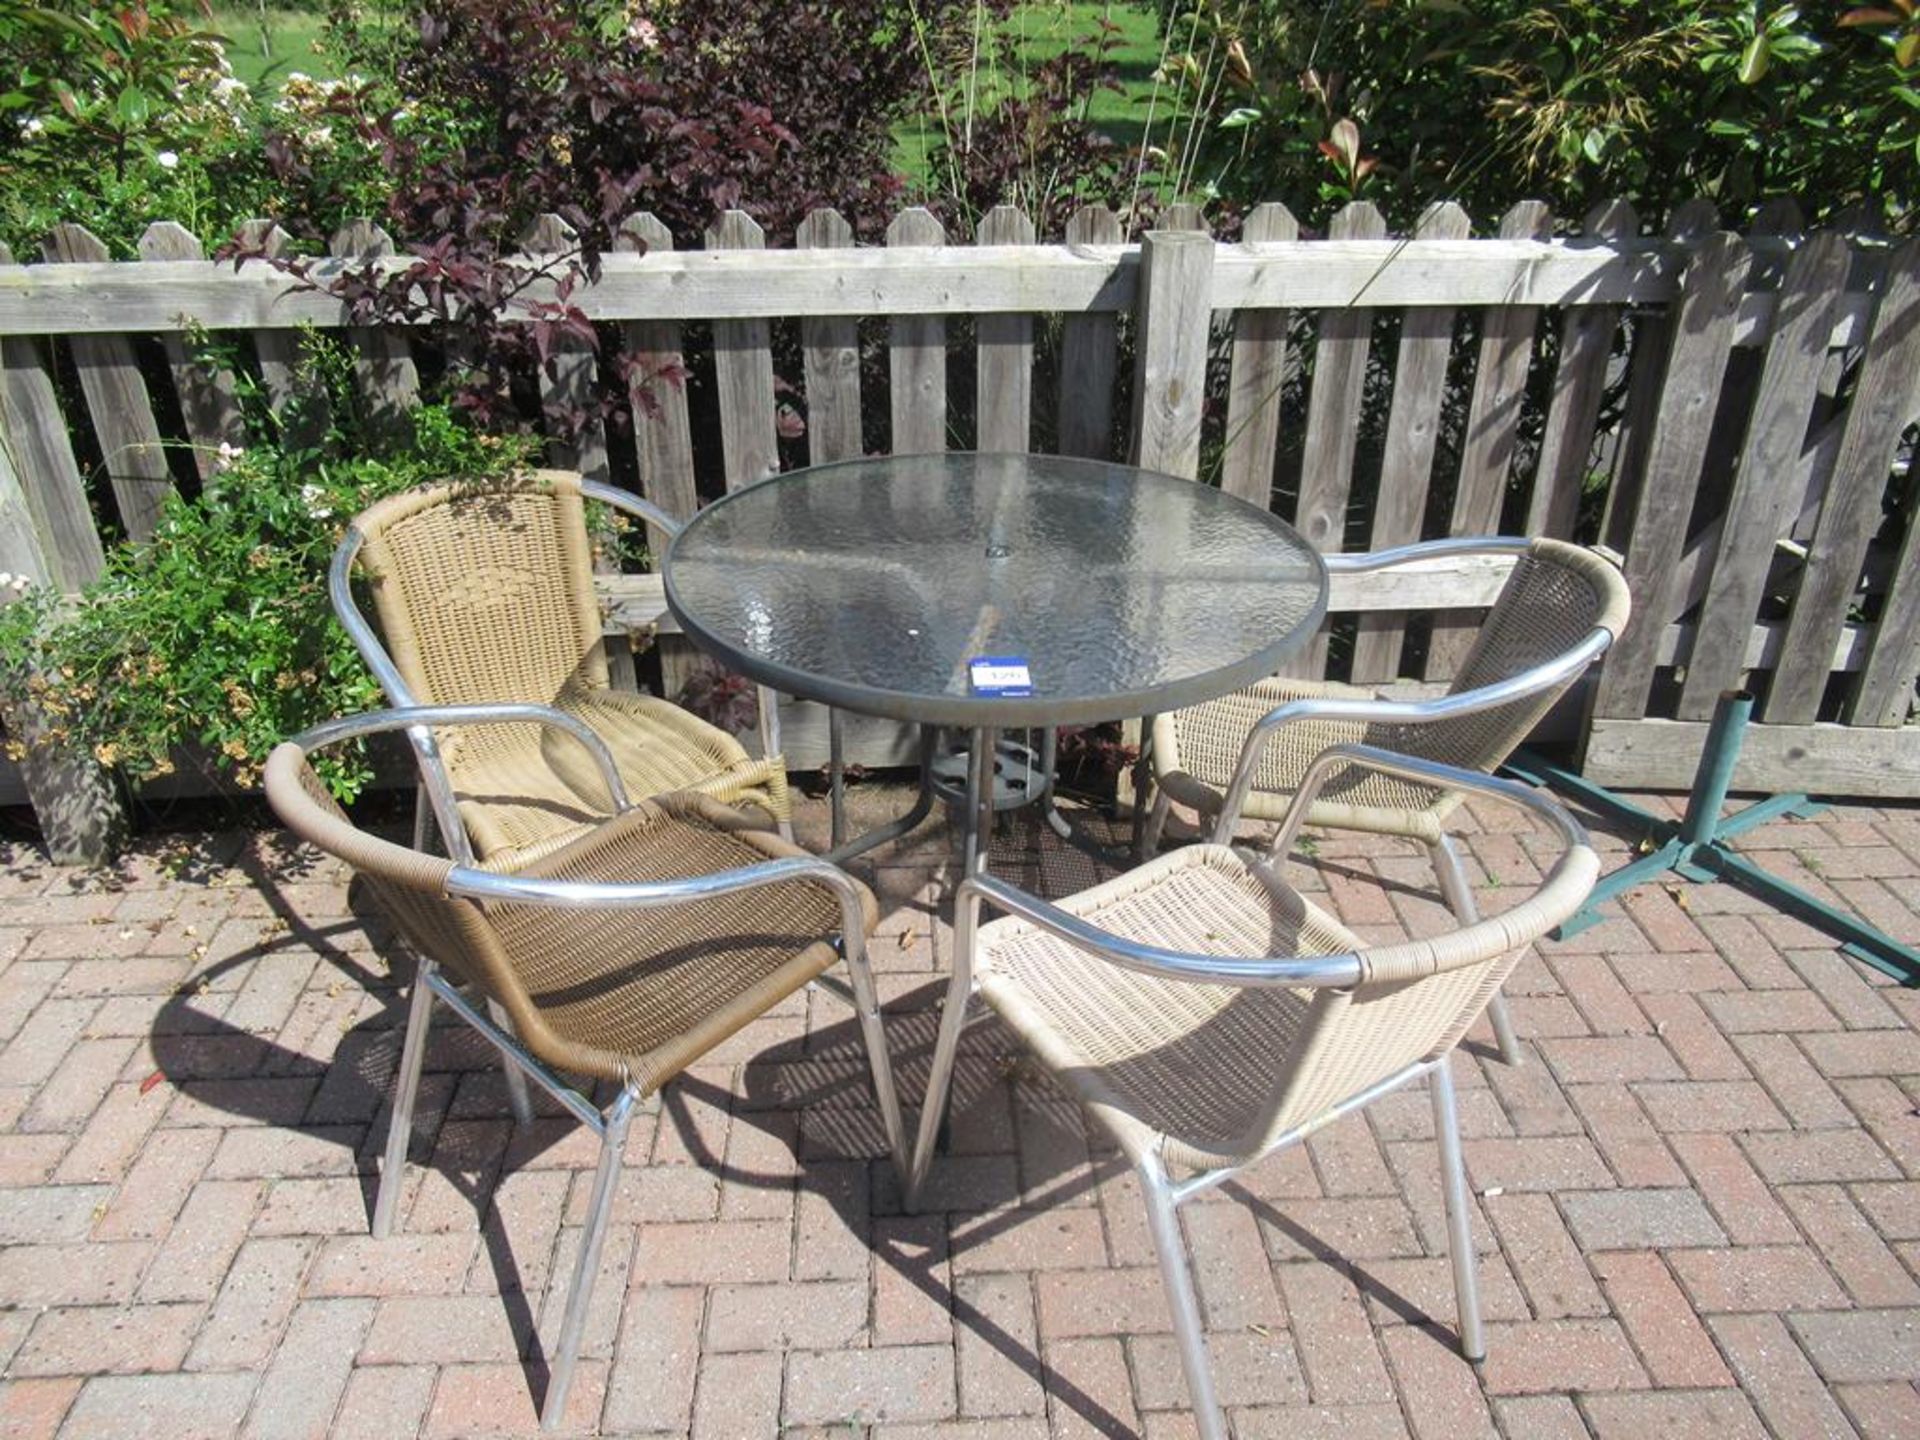 Metal Framed Circular Glass Top Garden Table and 4 x Matching Metal Framed Garden Chairs - Image 3 of 4